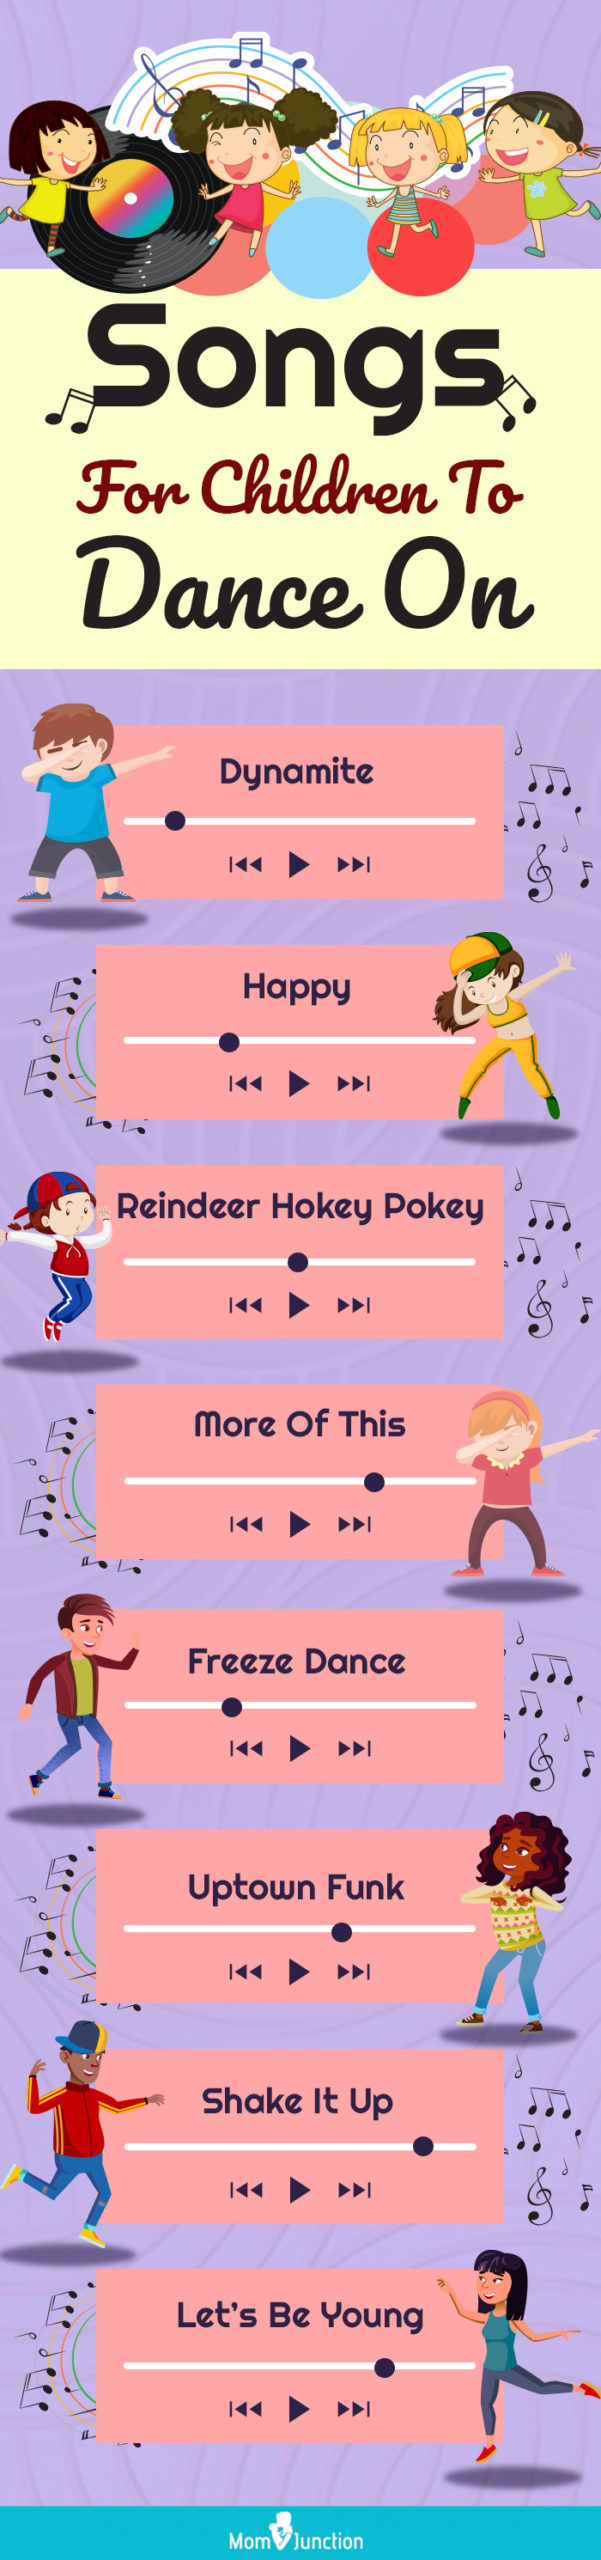 songs for children to dance on (infographic)